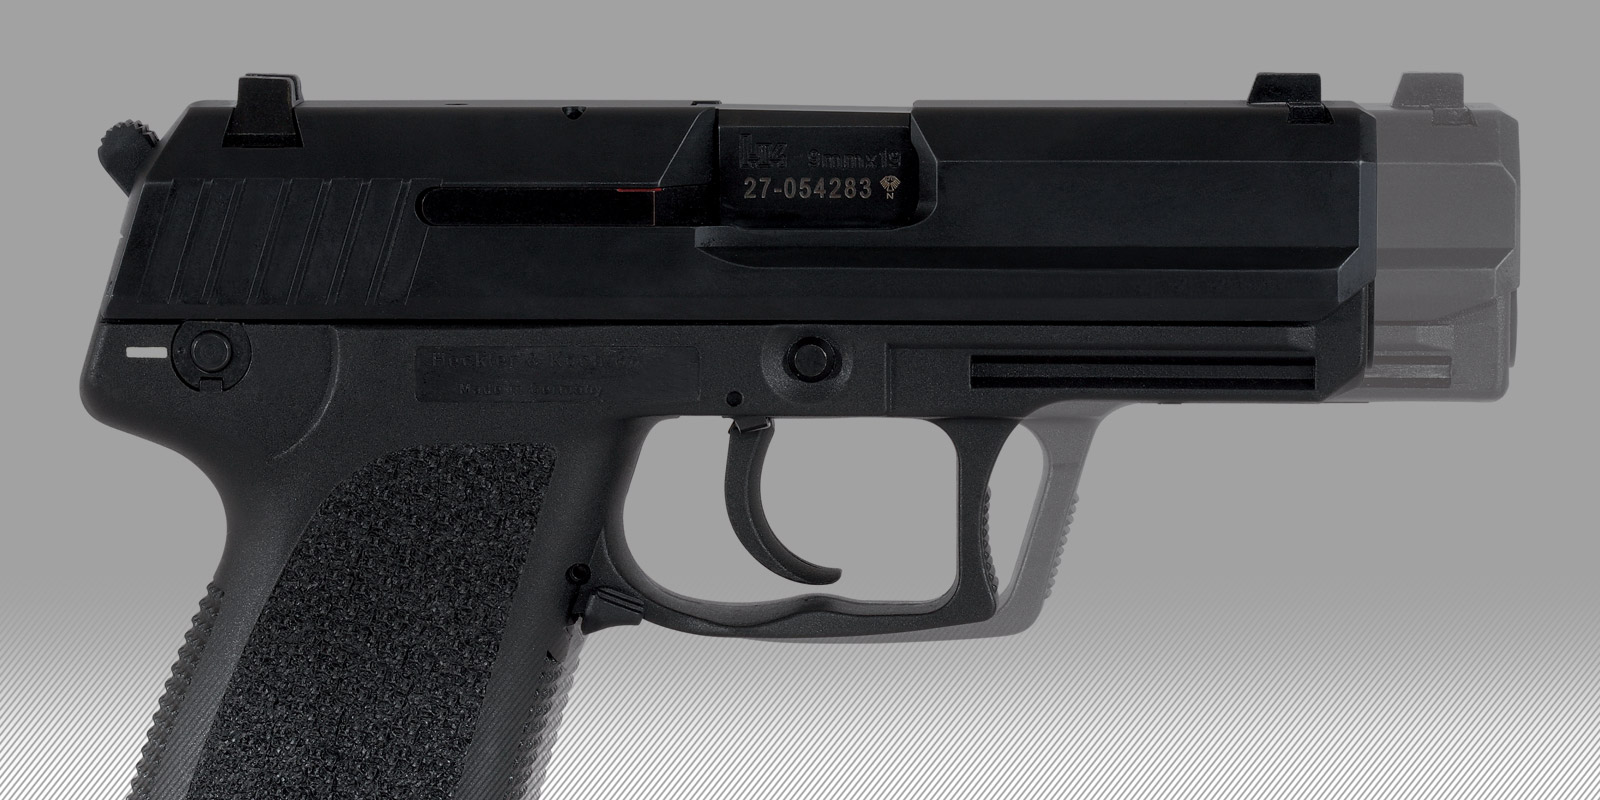 The HK USP Compact is a small frame pistol capable of firing the most power...